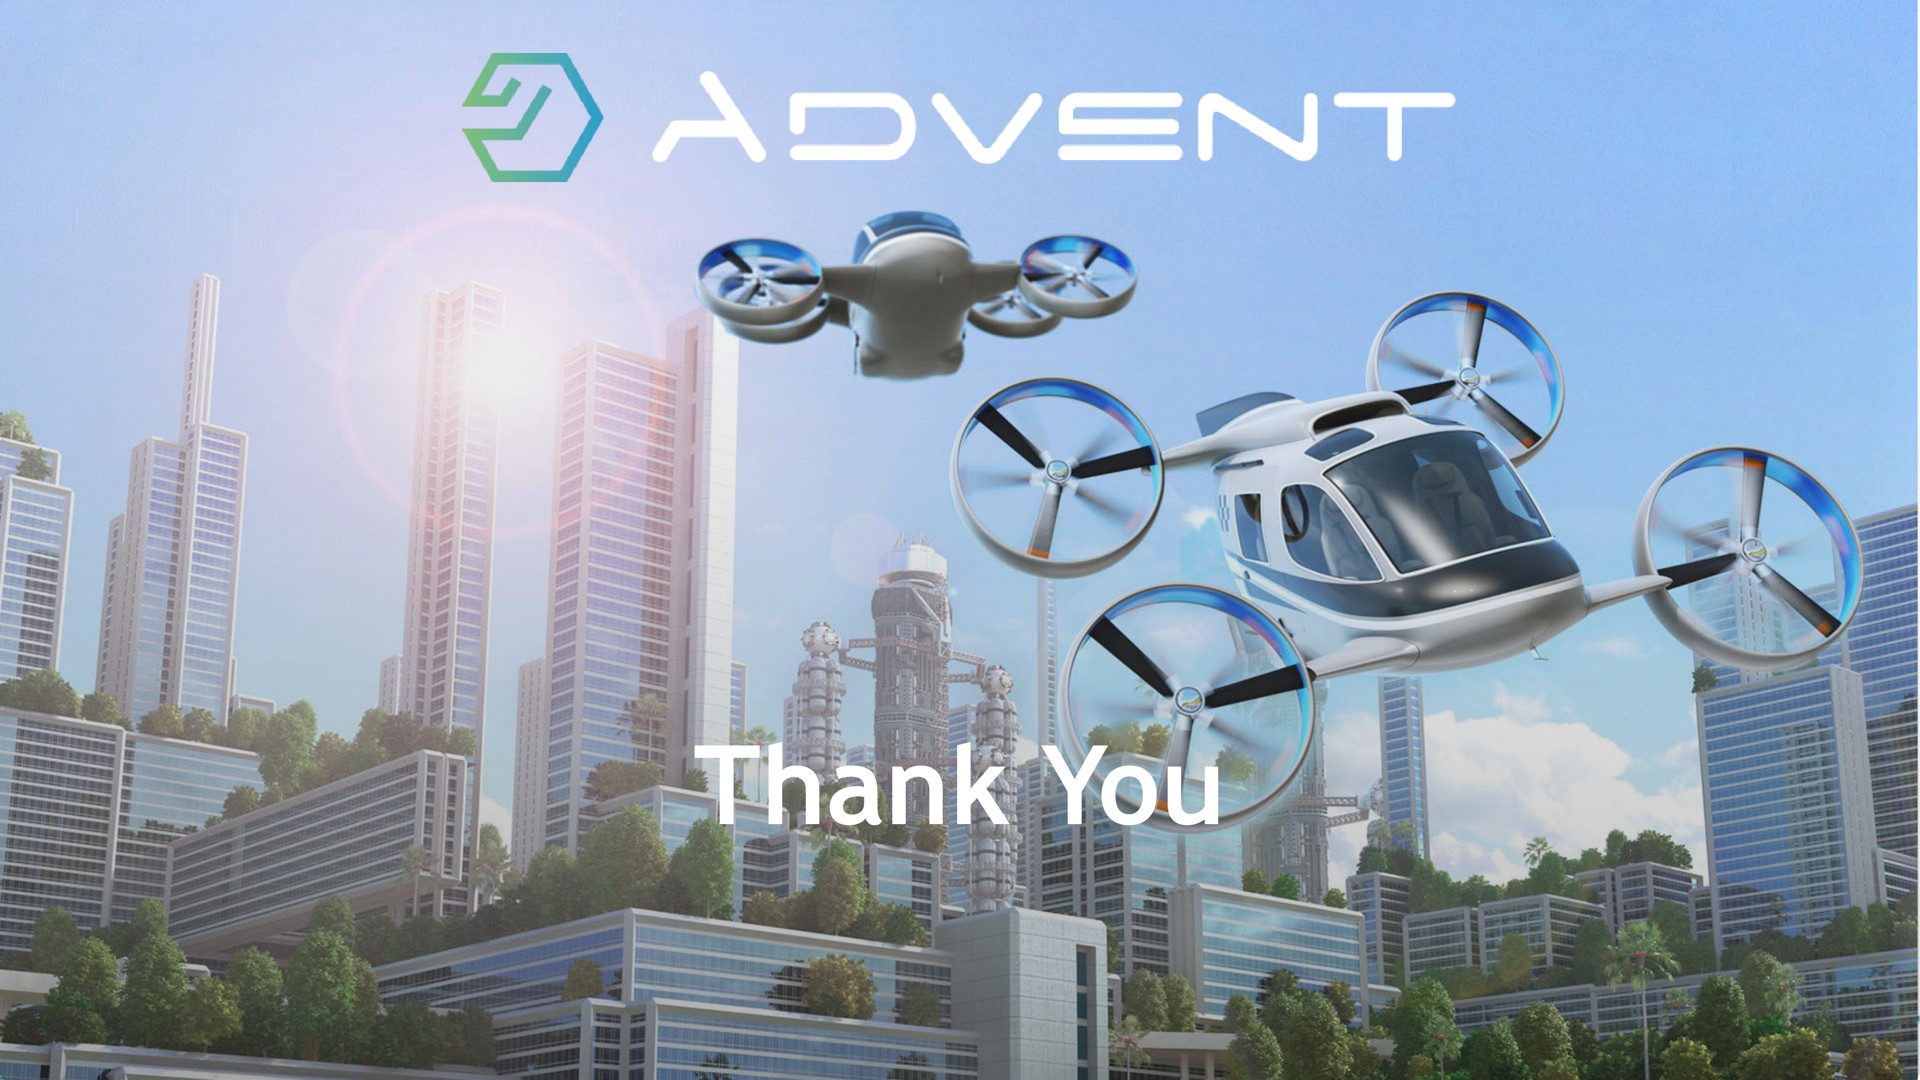 thank you | Advent